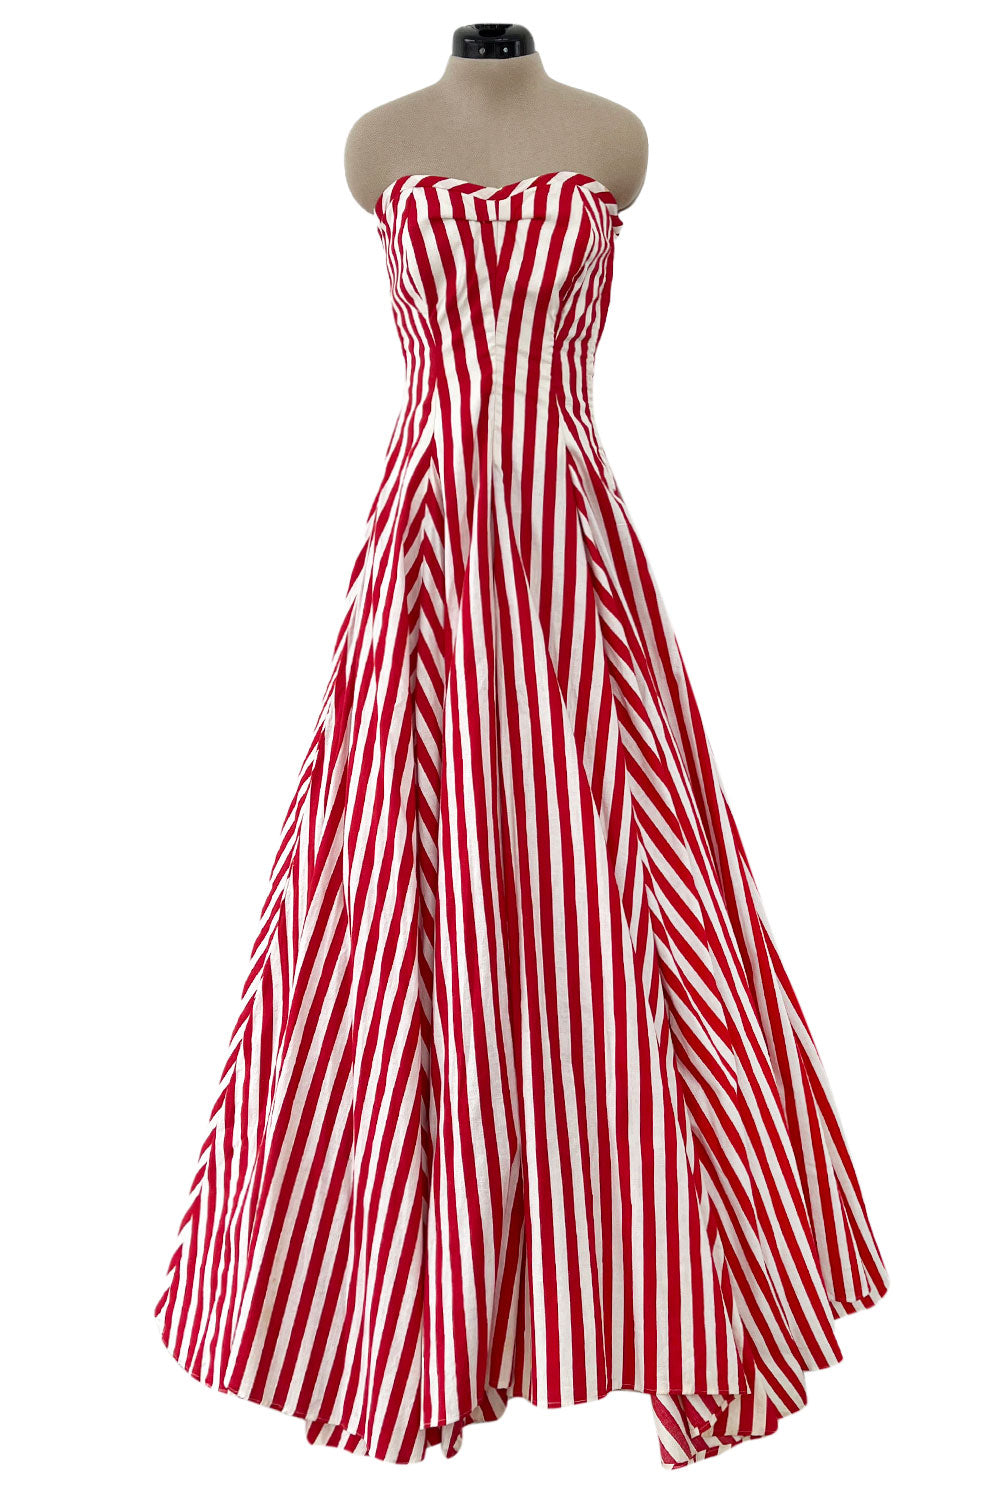 Spectacular 1930s Unlabeled Red & White Striped Cotton Strapless Sweet ...